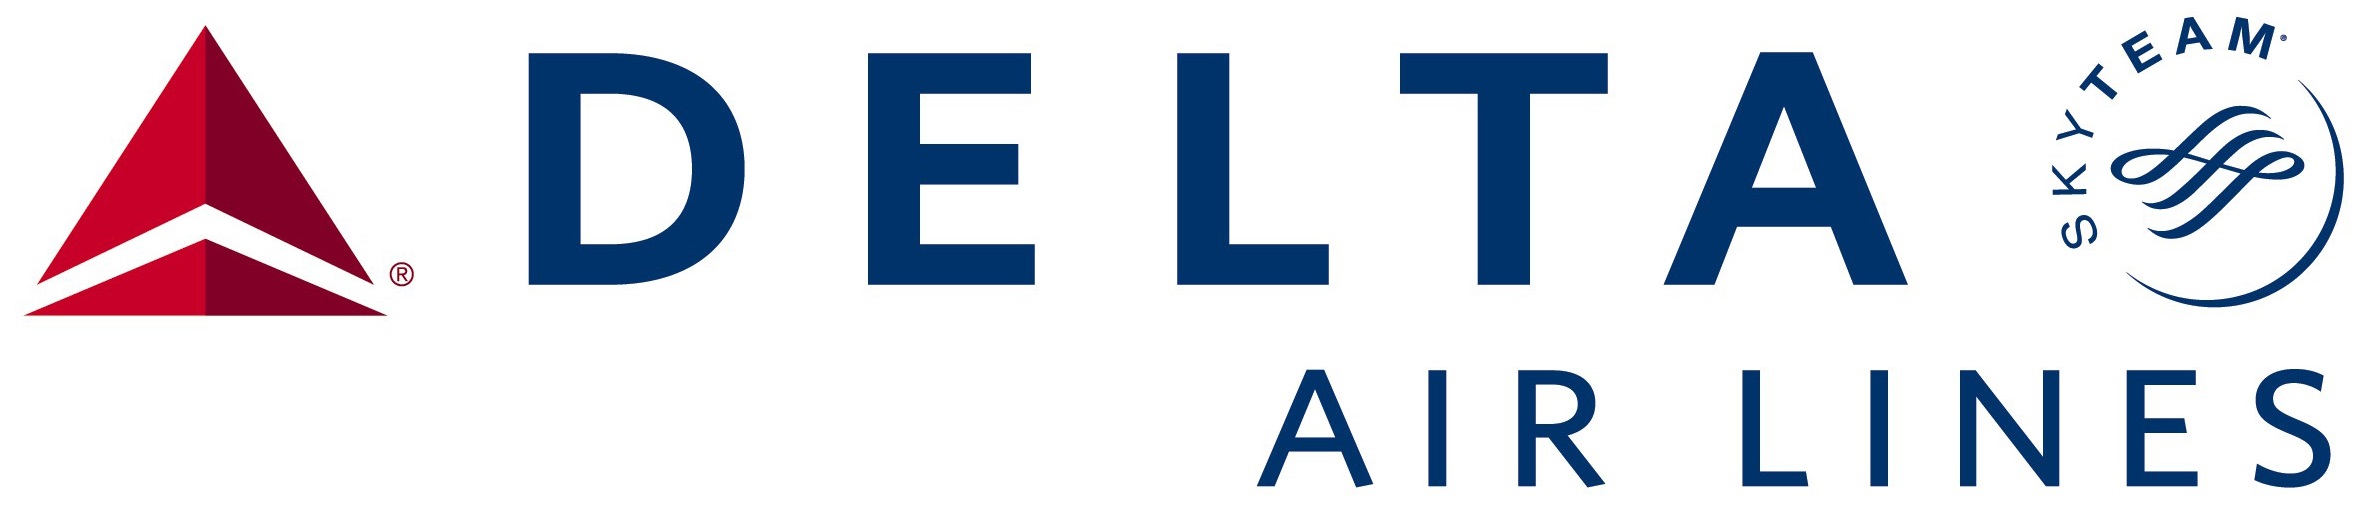 Delta Air Lines and the Atlan